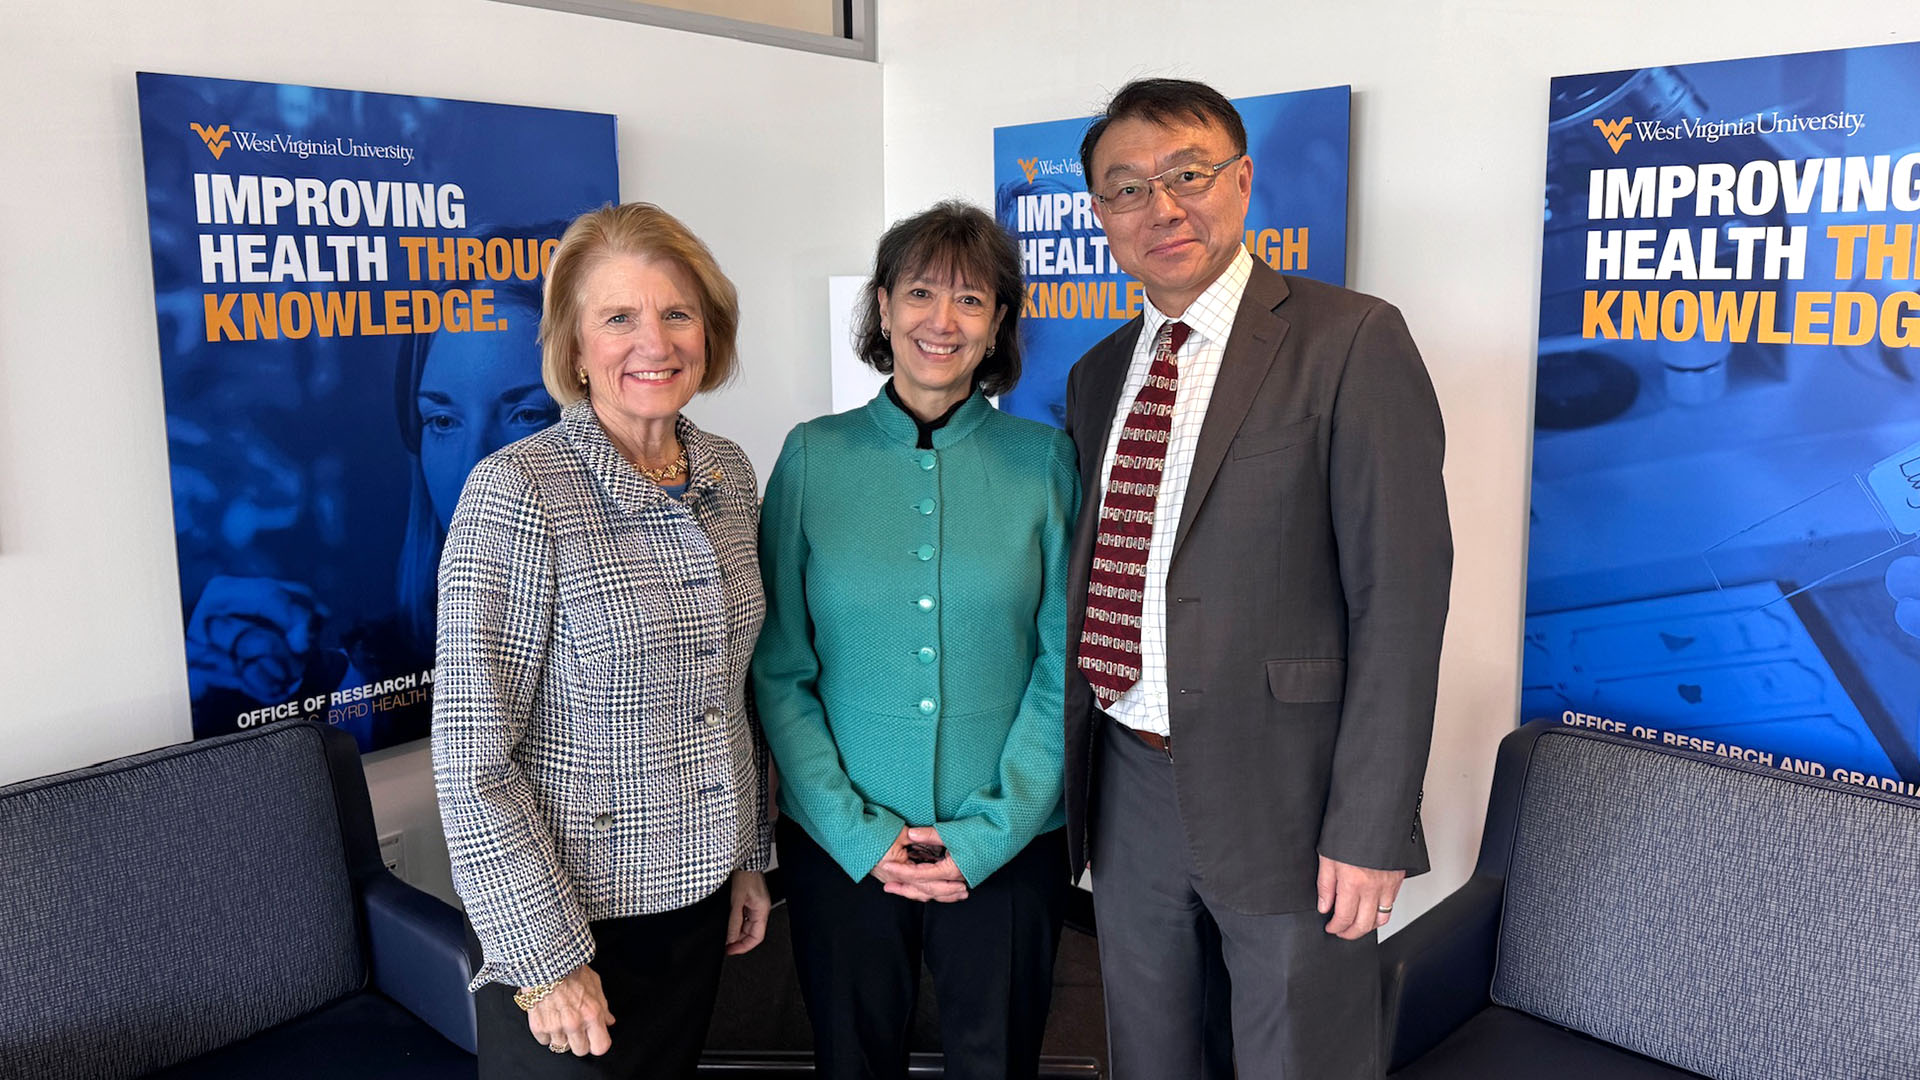 NIH Director Monica Bertagnolli with Senator Shelley Moore Capito, and Dr. Ming Lei, Vice Dean of Research at the WVU School of Medicine standing in front of posters that read 